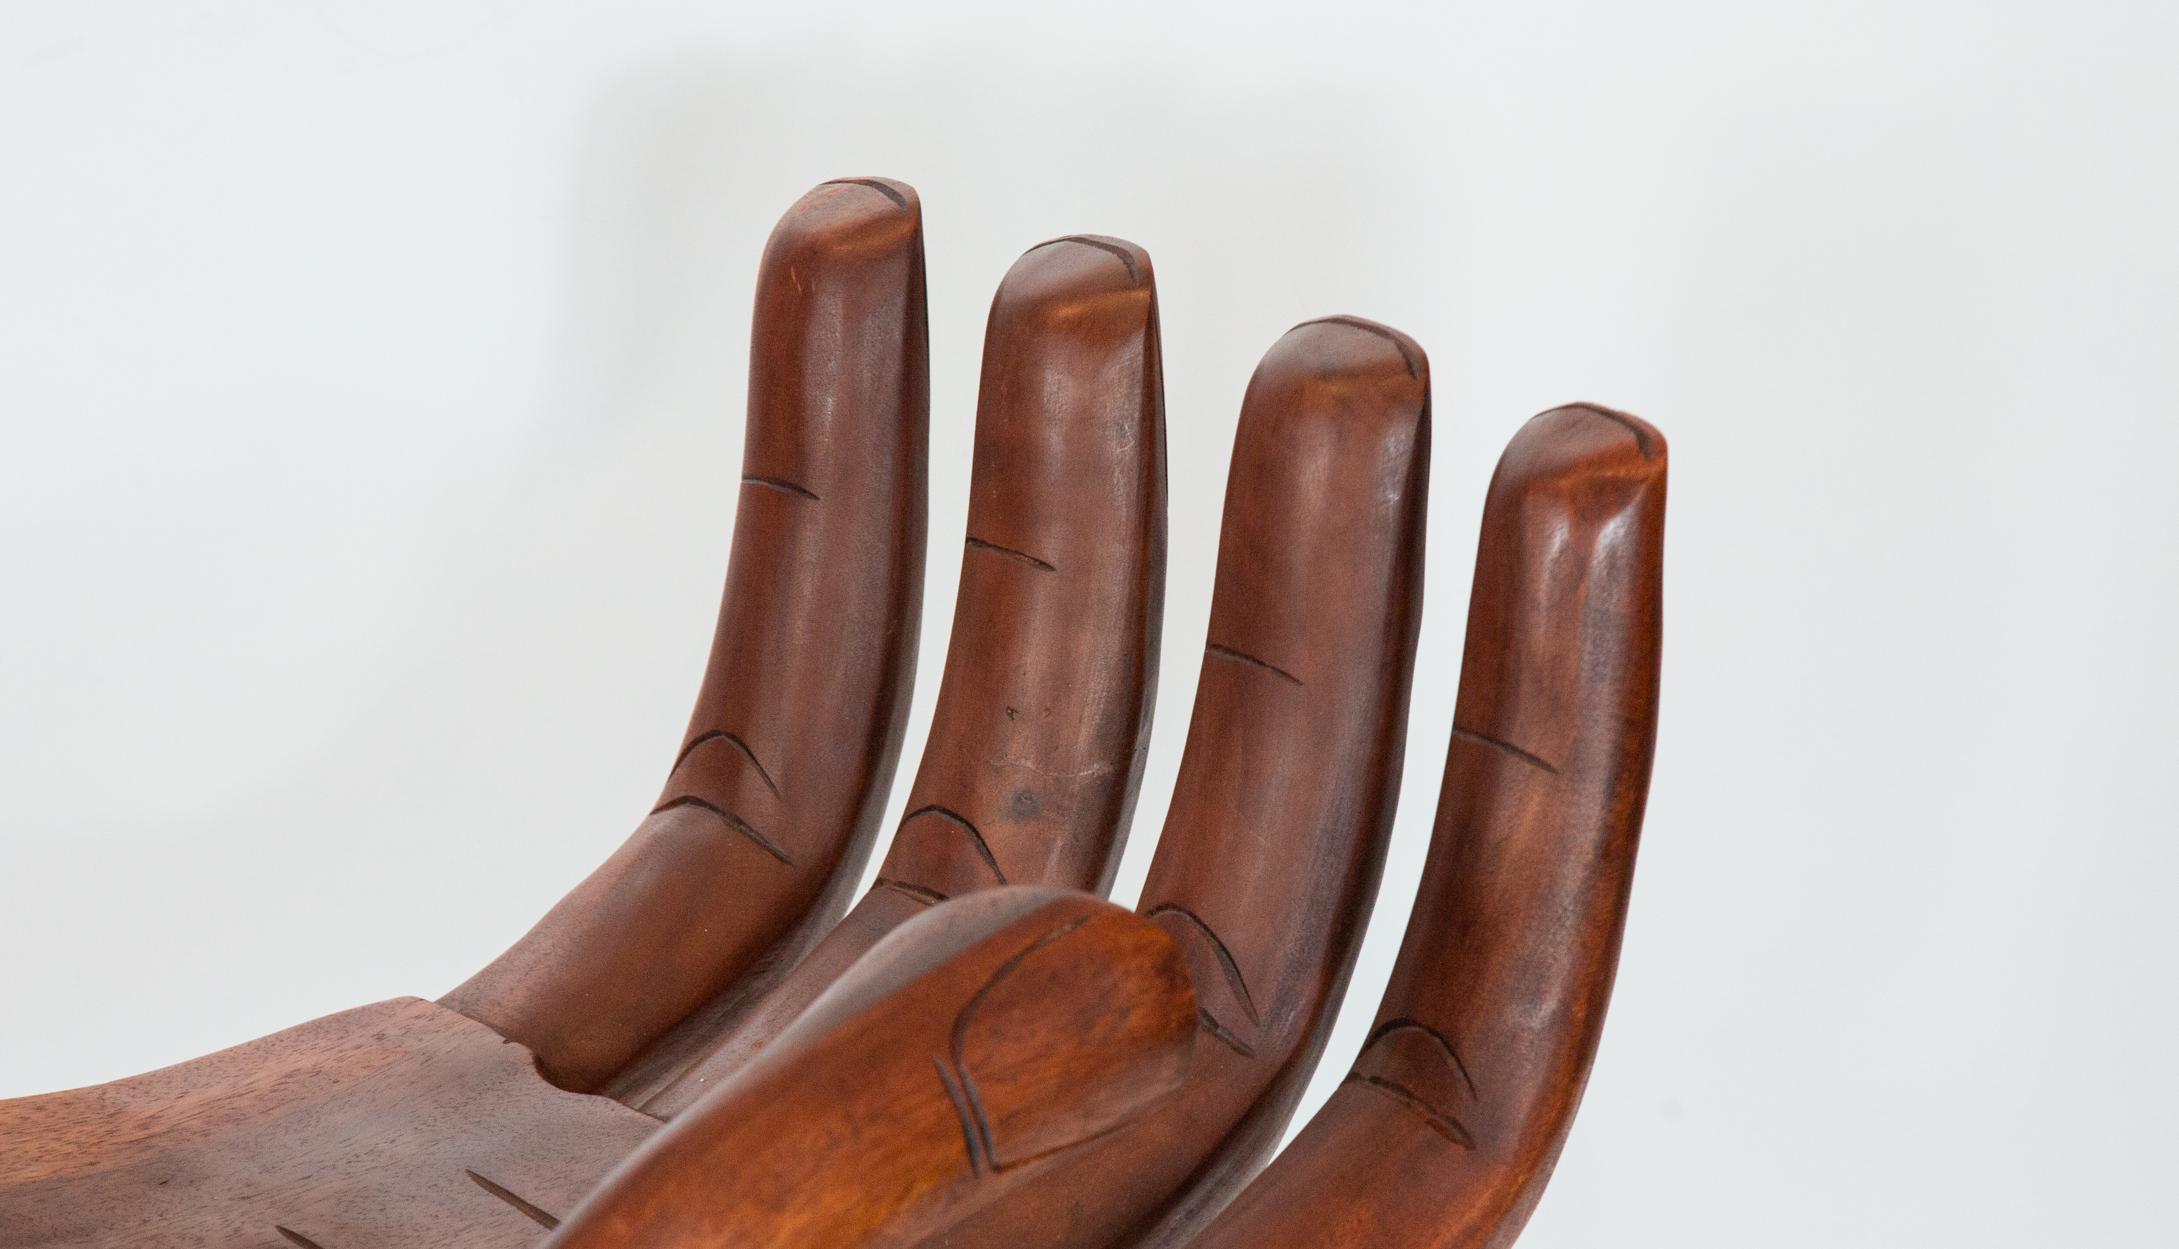 Mid-20th century wooden hand chair. Carved from an attractive warm red wood. Measure: 24